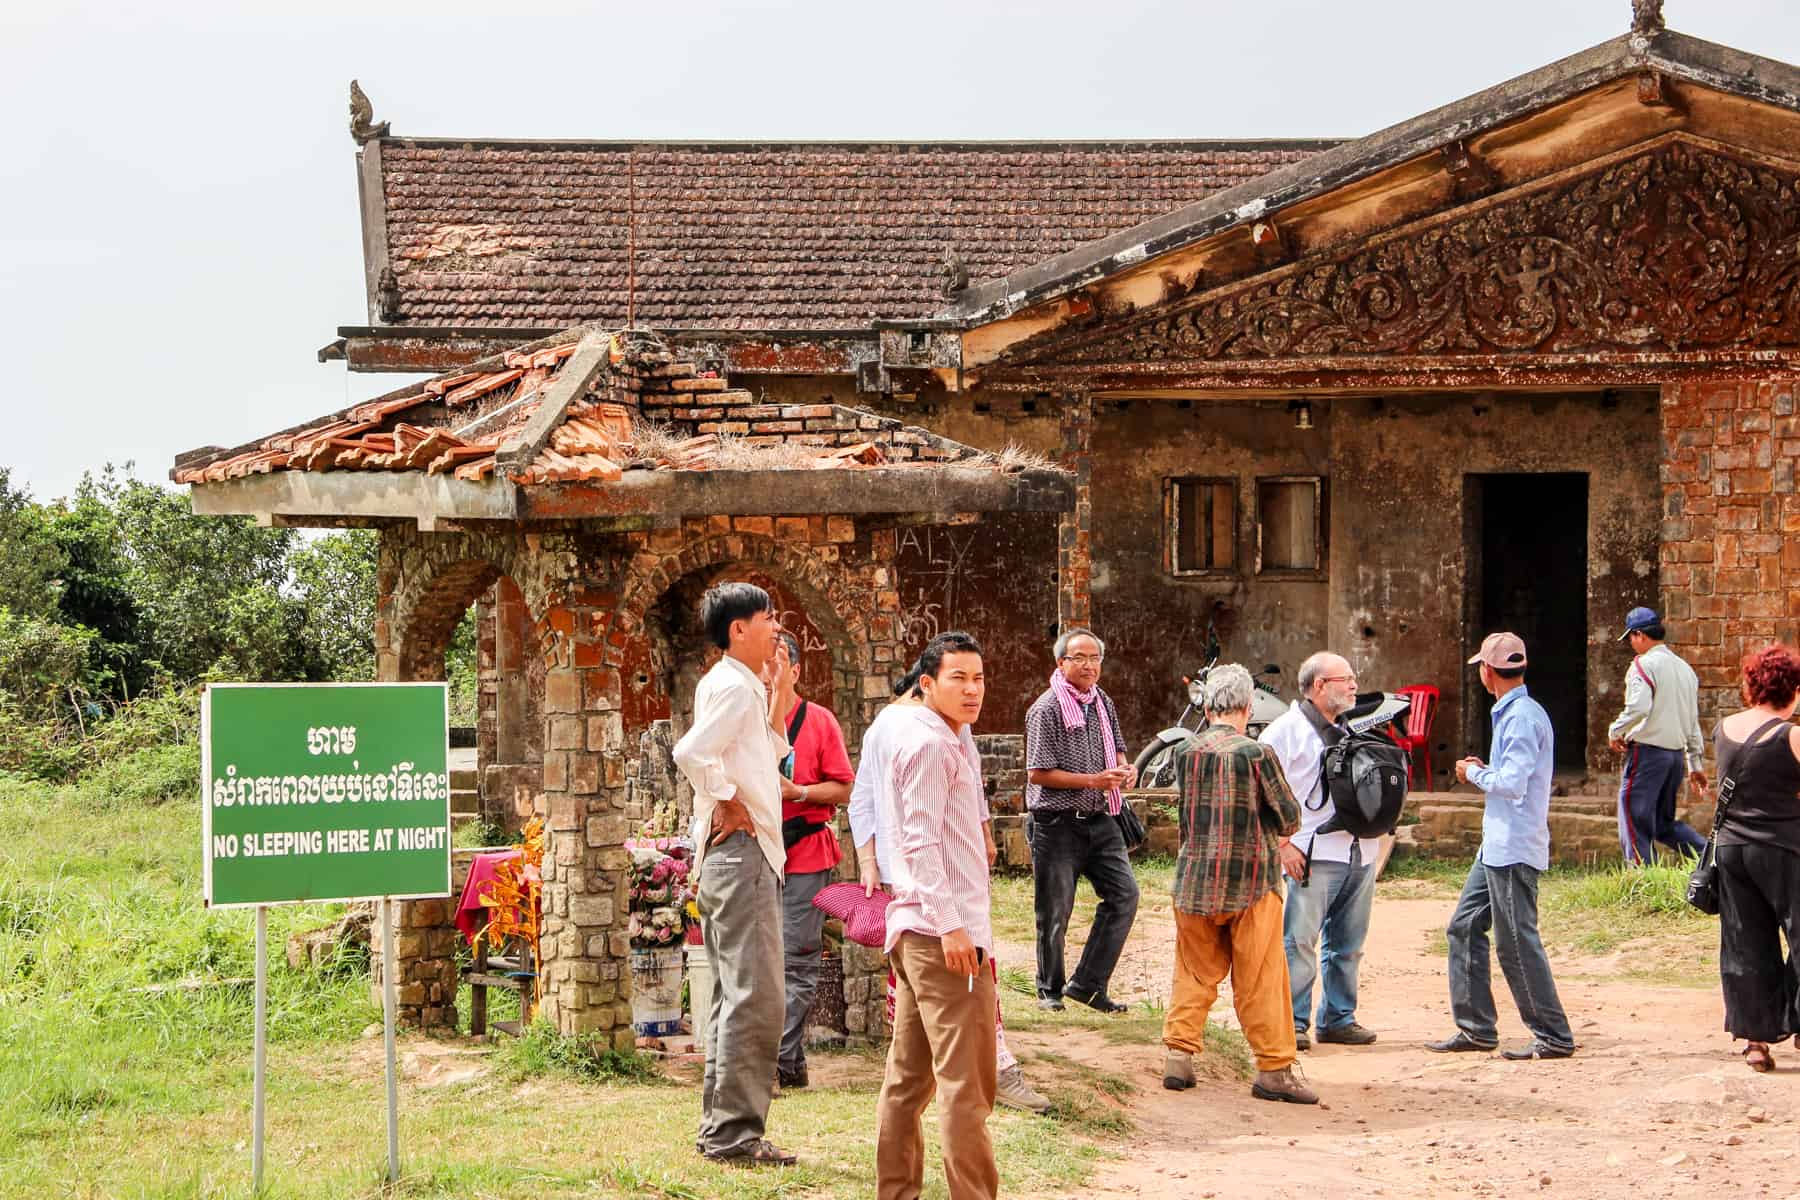 A group of people gather outside an abandoned, crumbling, orange brick royal Cambodian palace in Kampot. A green sign says 'no sleeping here at night'.